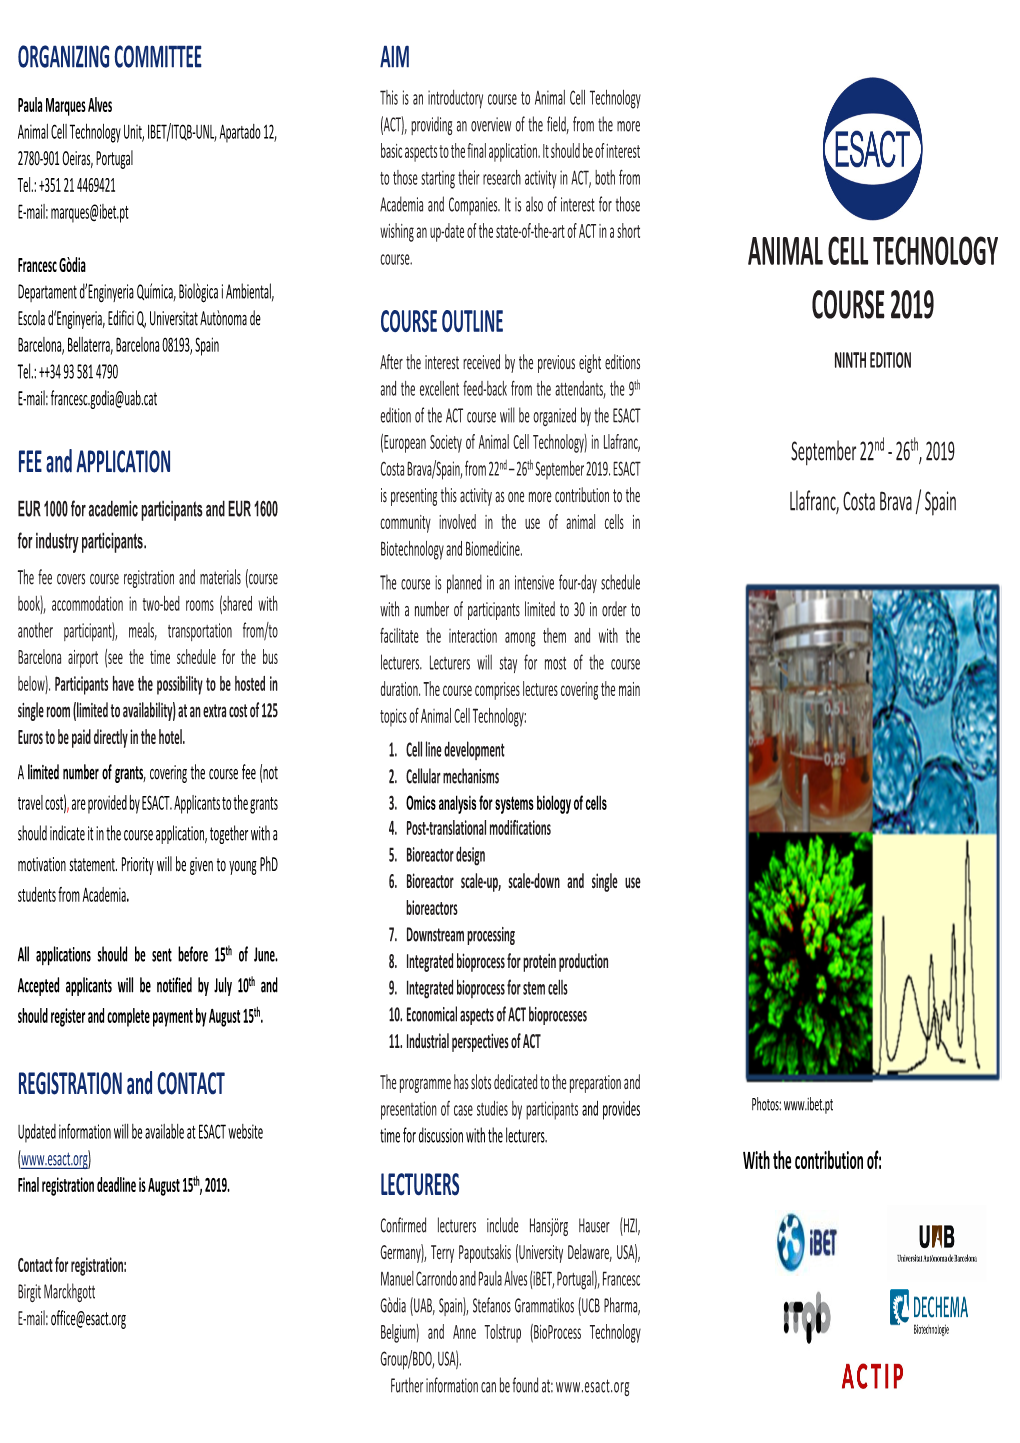 Animal Cell Technology Course 2019